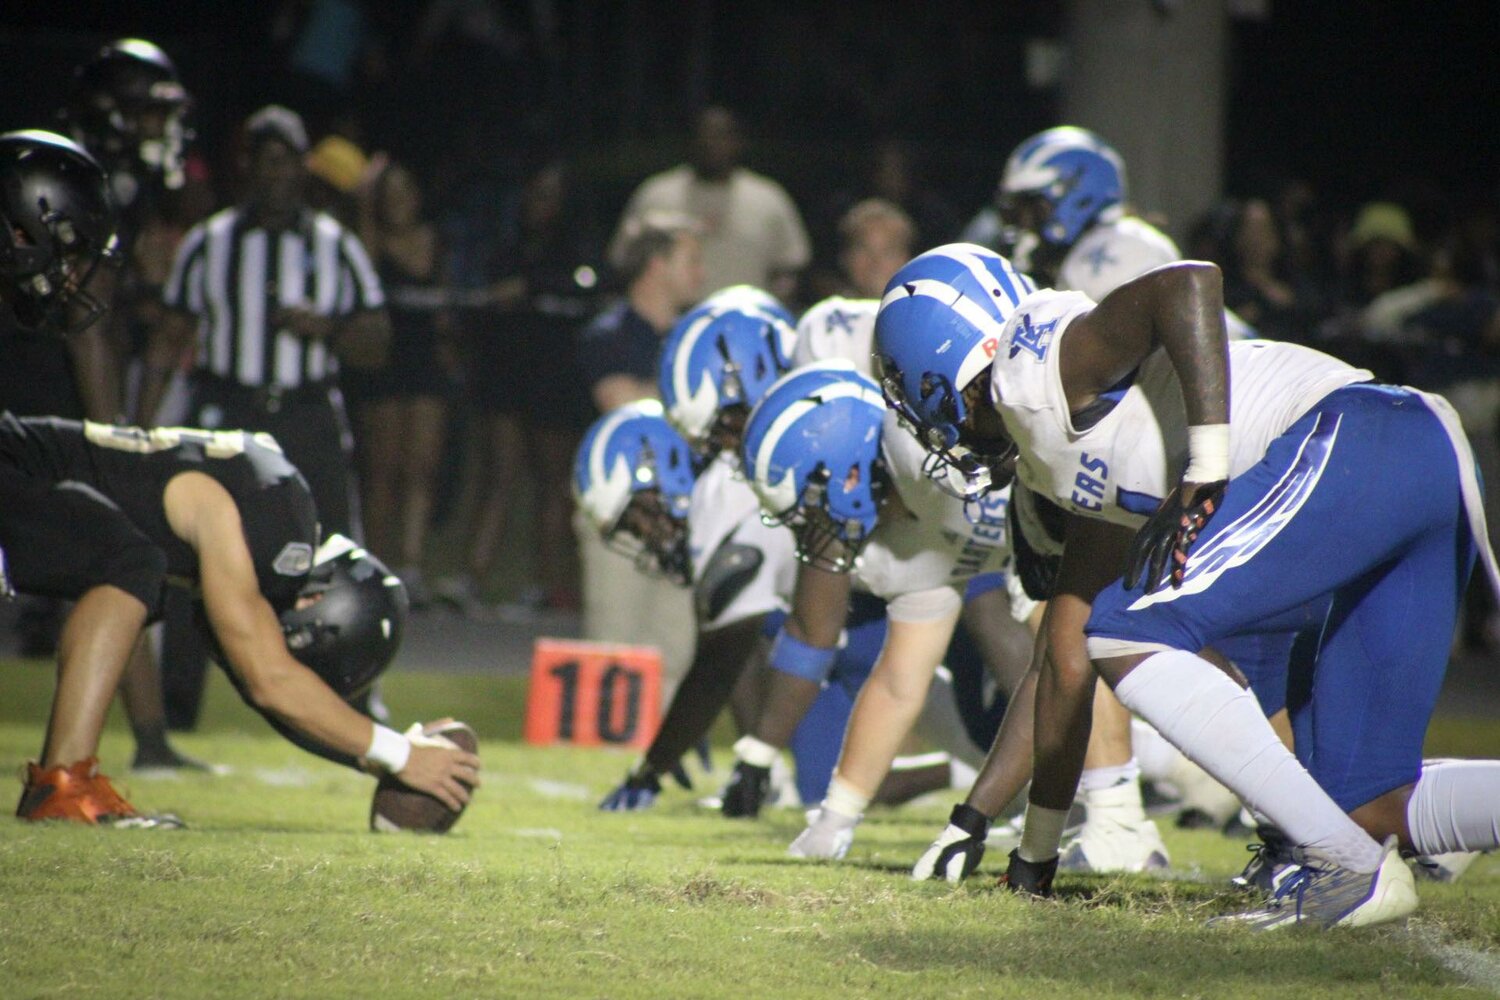 On a blocked punt with less than three minutes left in the game, Apopka broke a scoreless tie with a safety and defeated Ocoee 2-0 in its season opener.